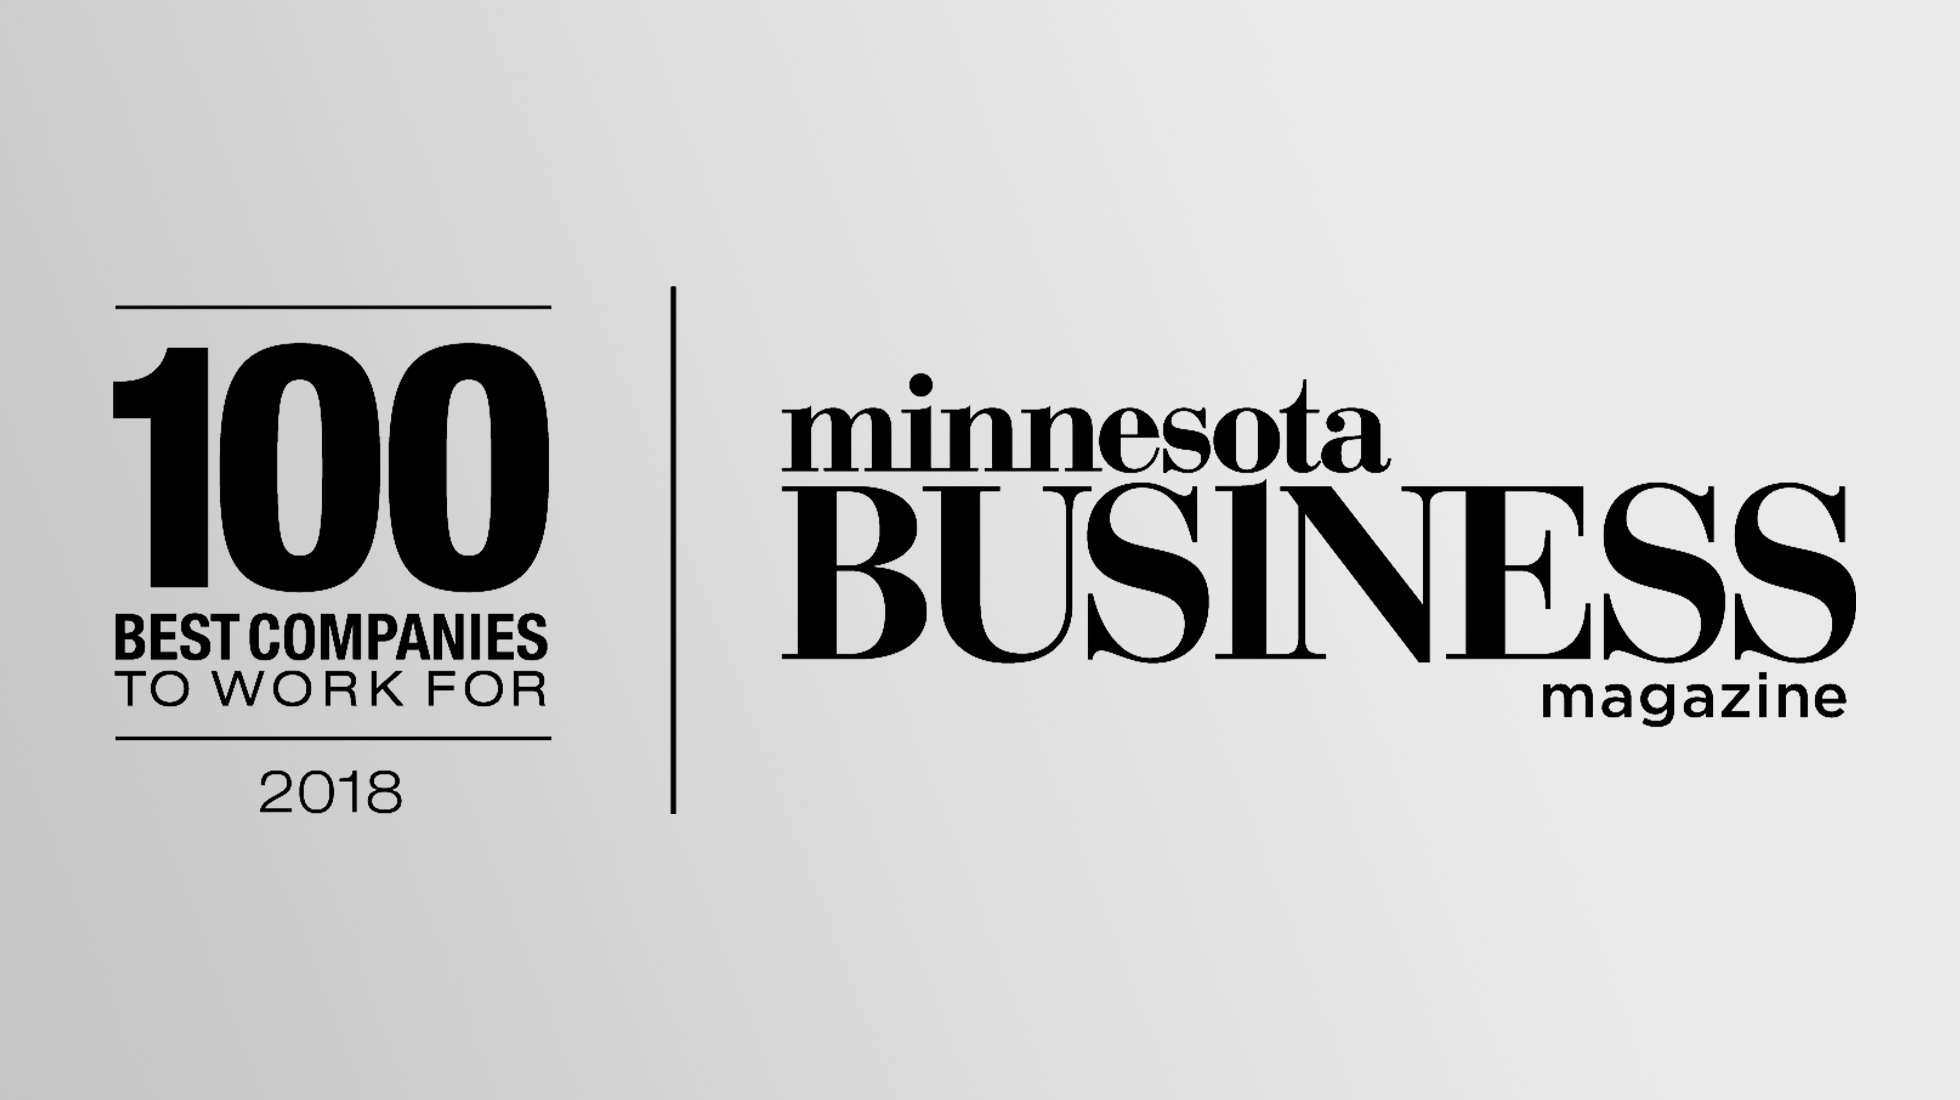 broadhead is one of Minnesota's Best Companies to Work For